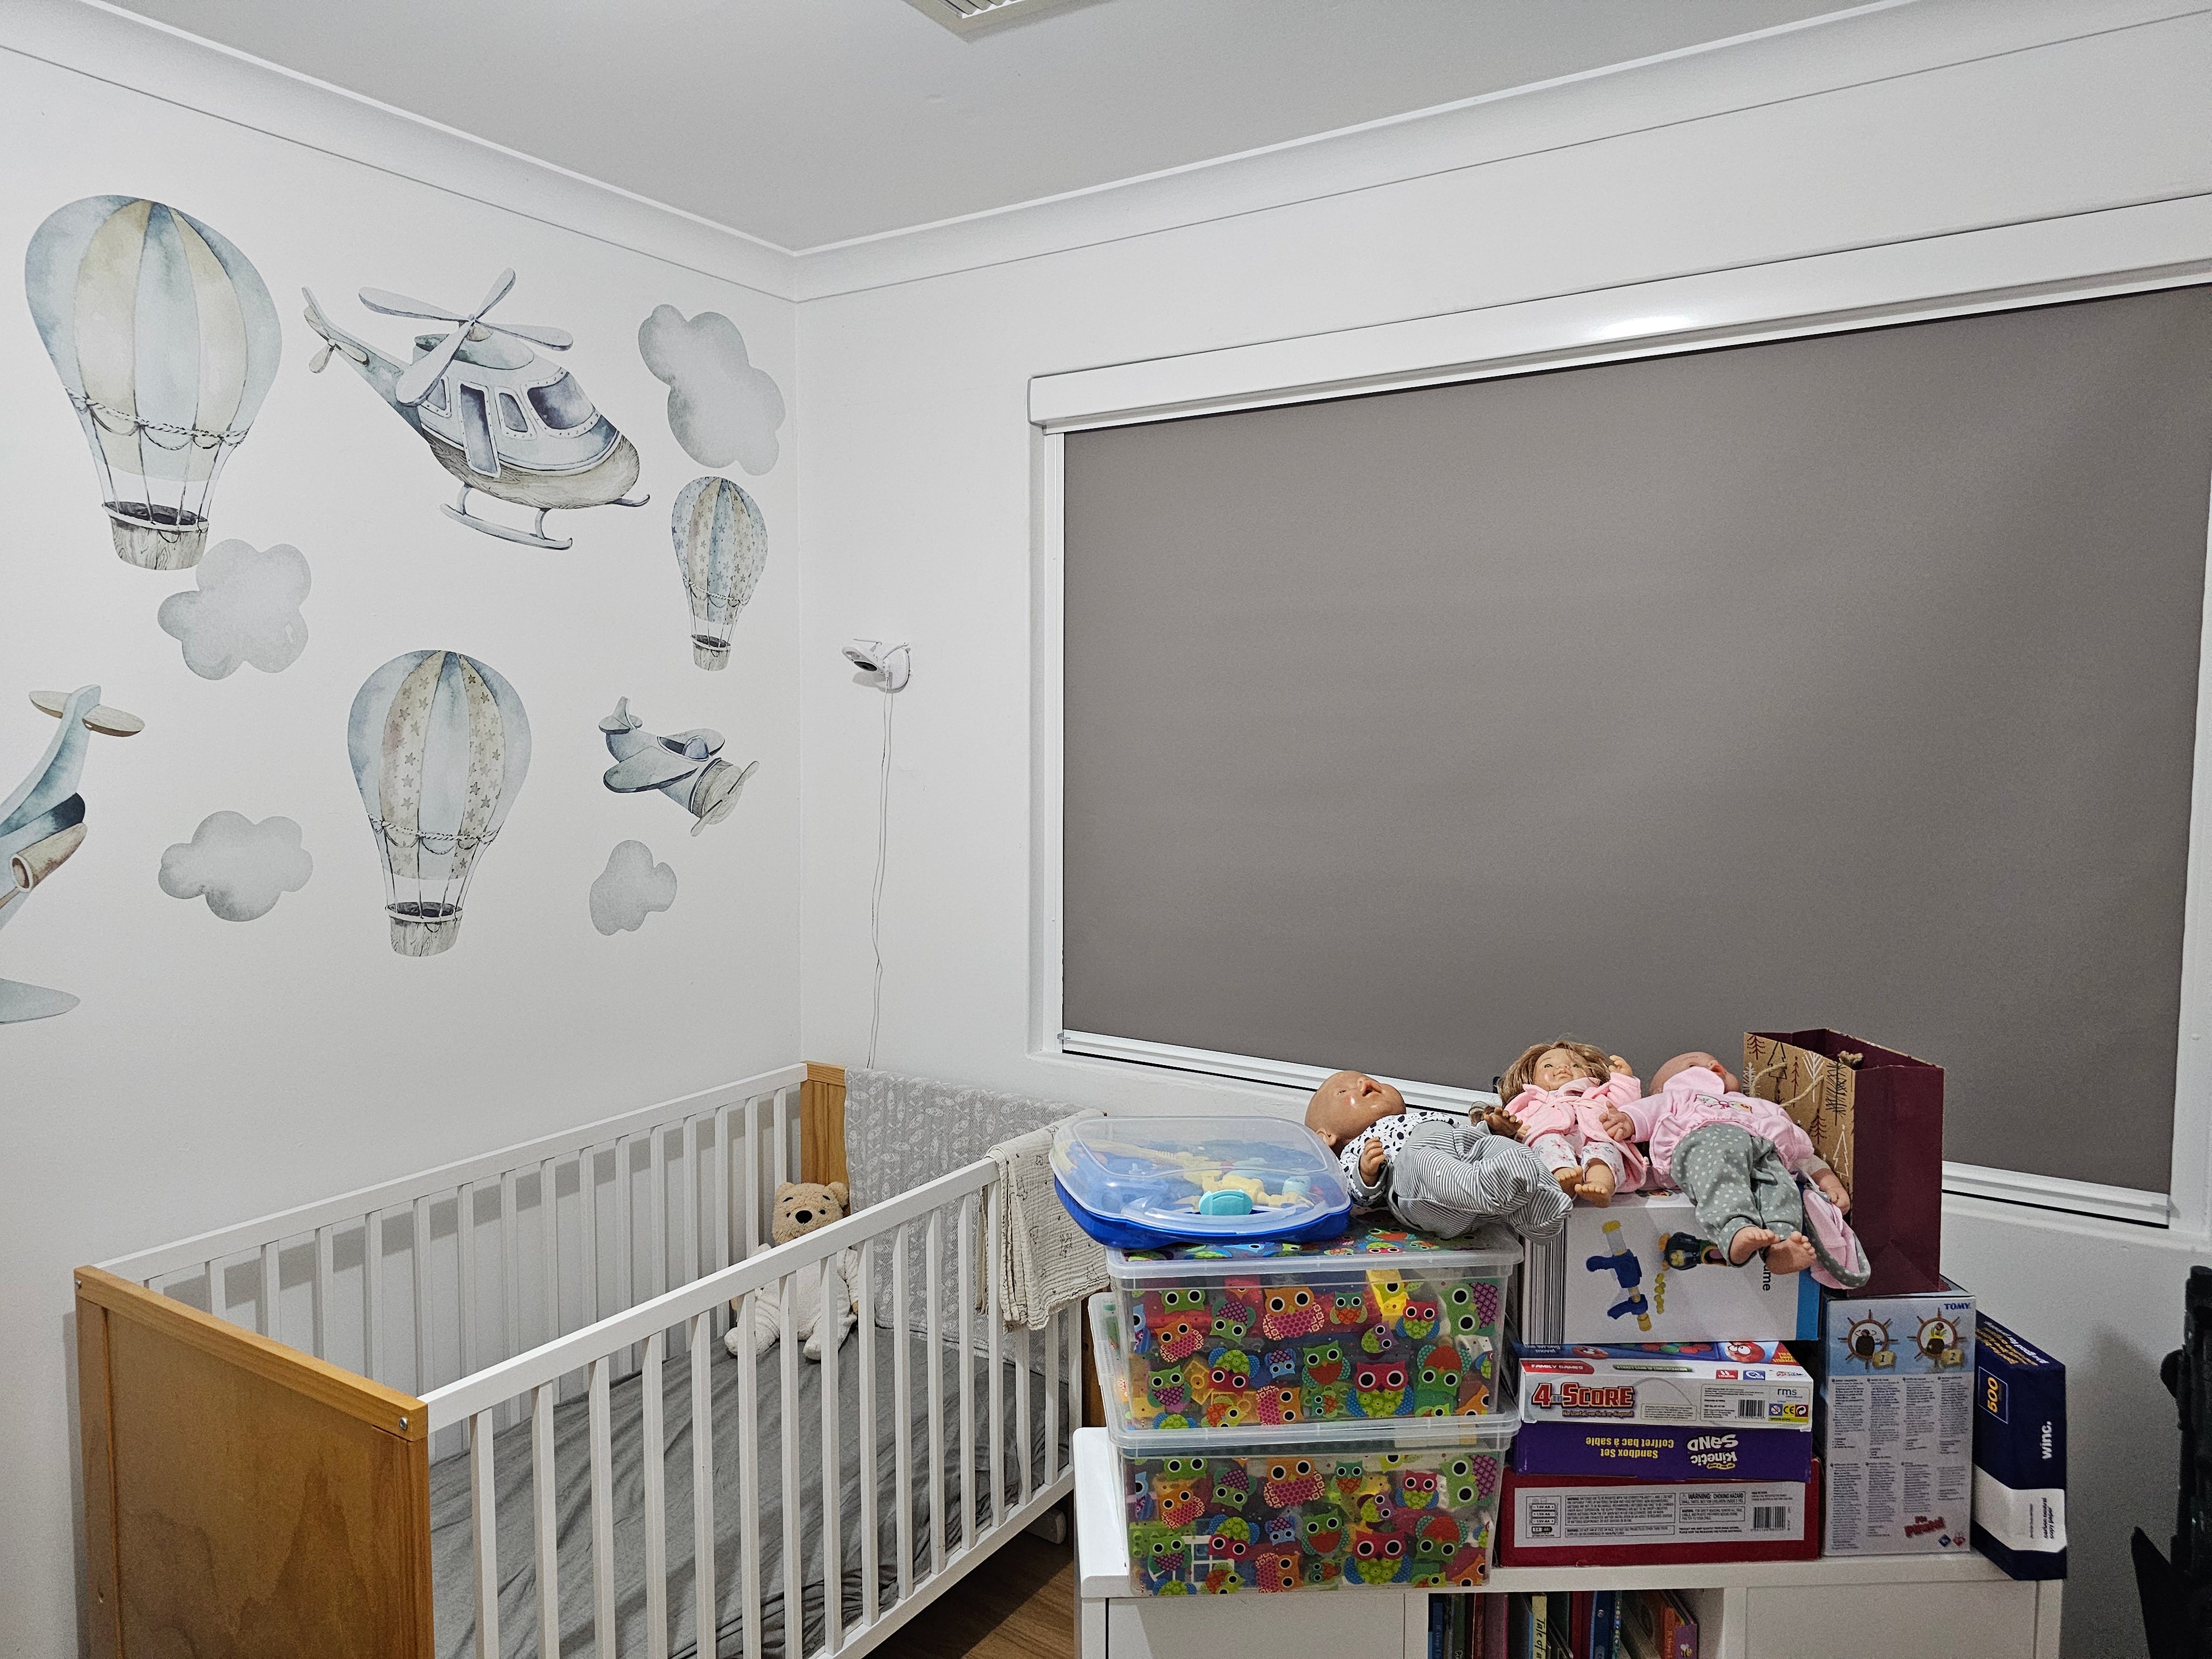 Blackout blind in a baby's nursery brown coloured blinds